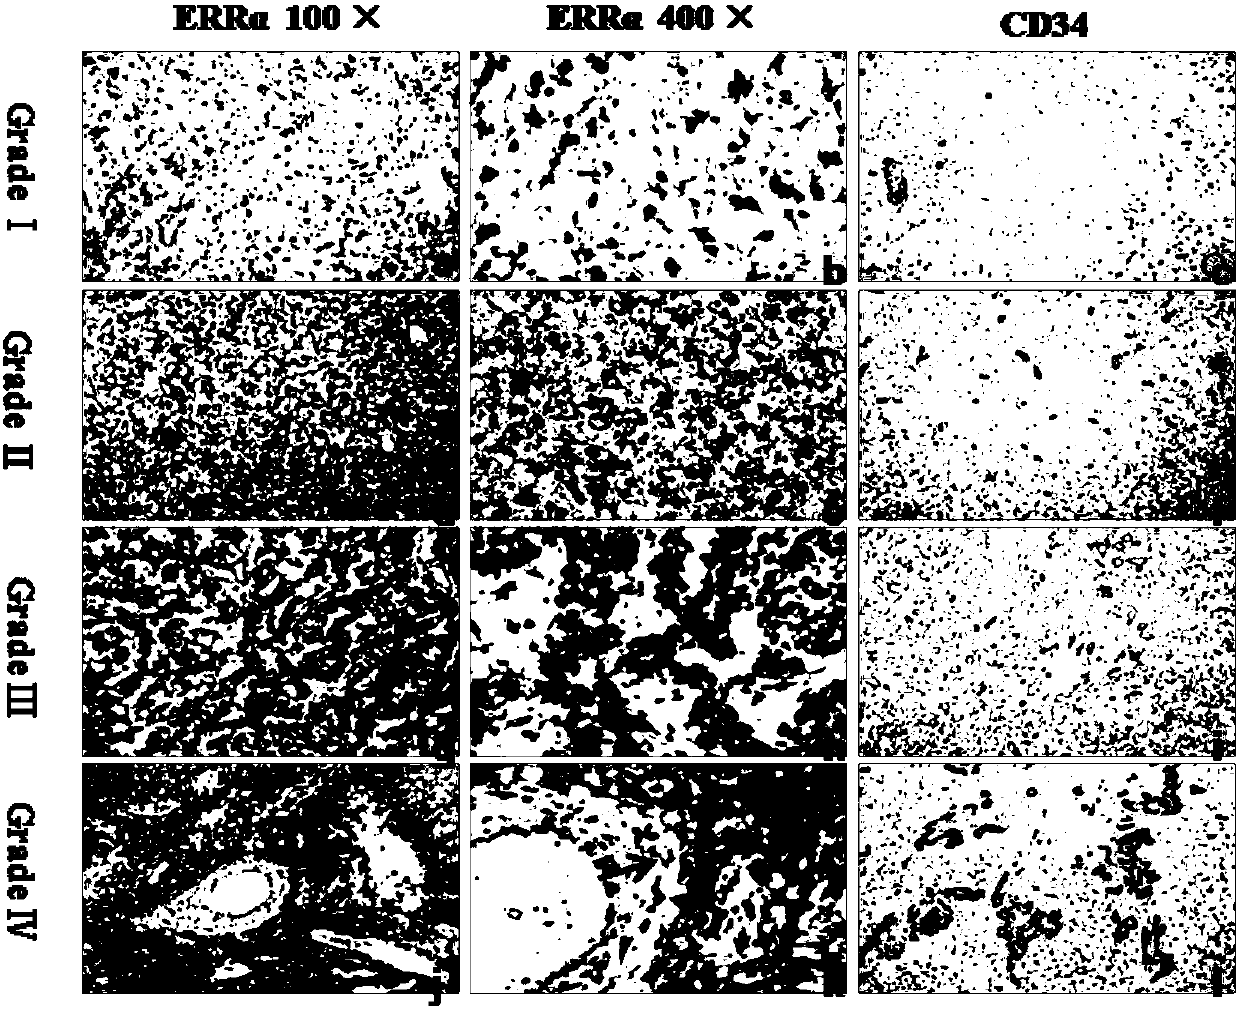 Use of estrogen-related receptor alpha as diagnostic marker for glioma and related application